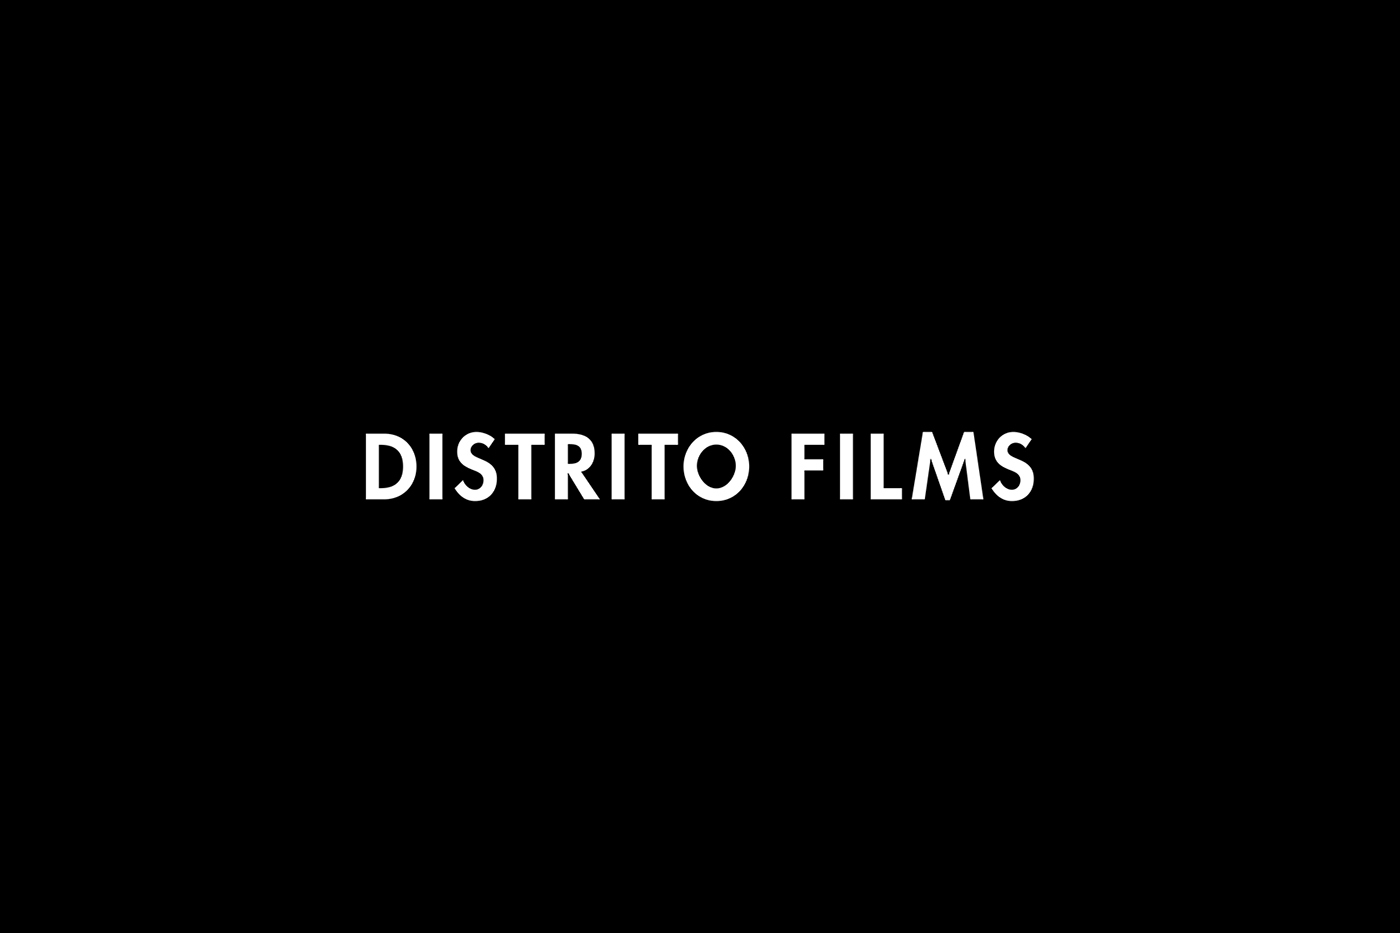 films Production mexico city direction Commercials documentaries director cinematography language Short films video Scripts camera calibration Cinema